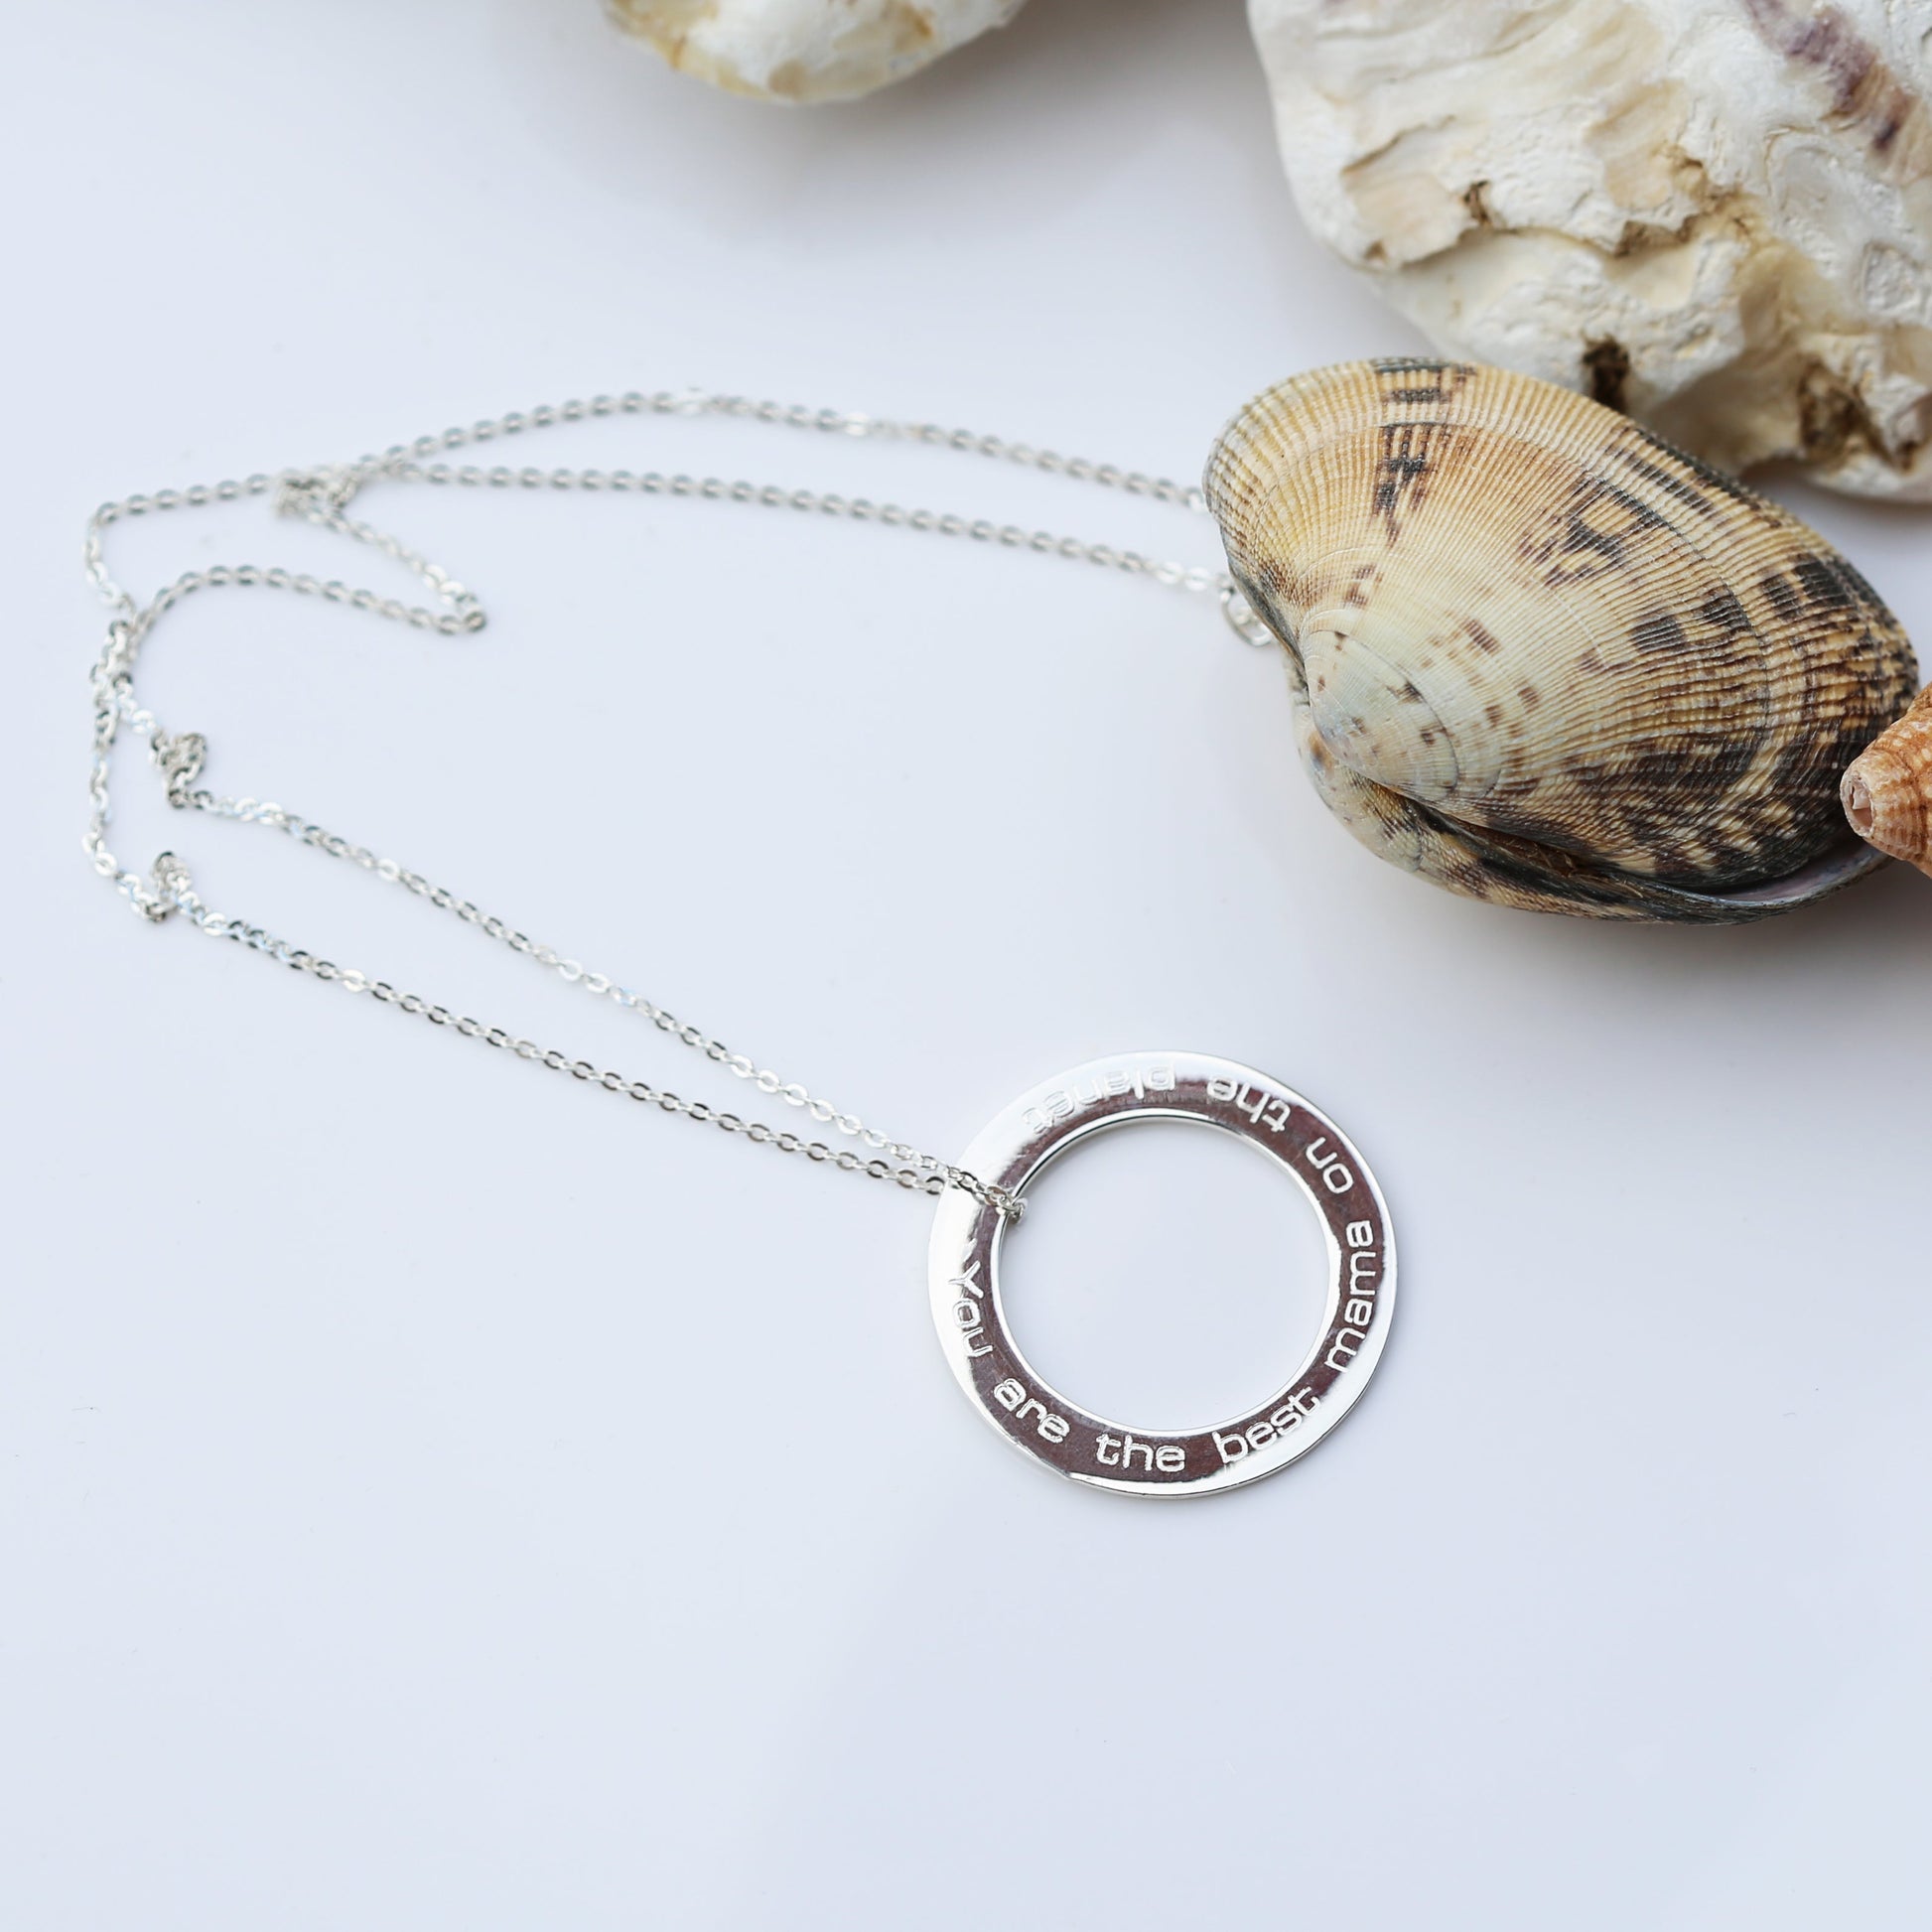 Personalized Necklaces - Sterling Silver Halo Necklace 